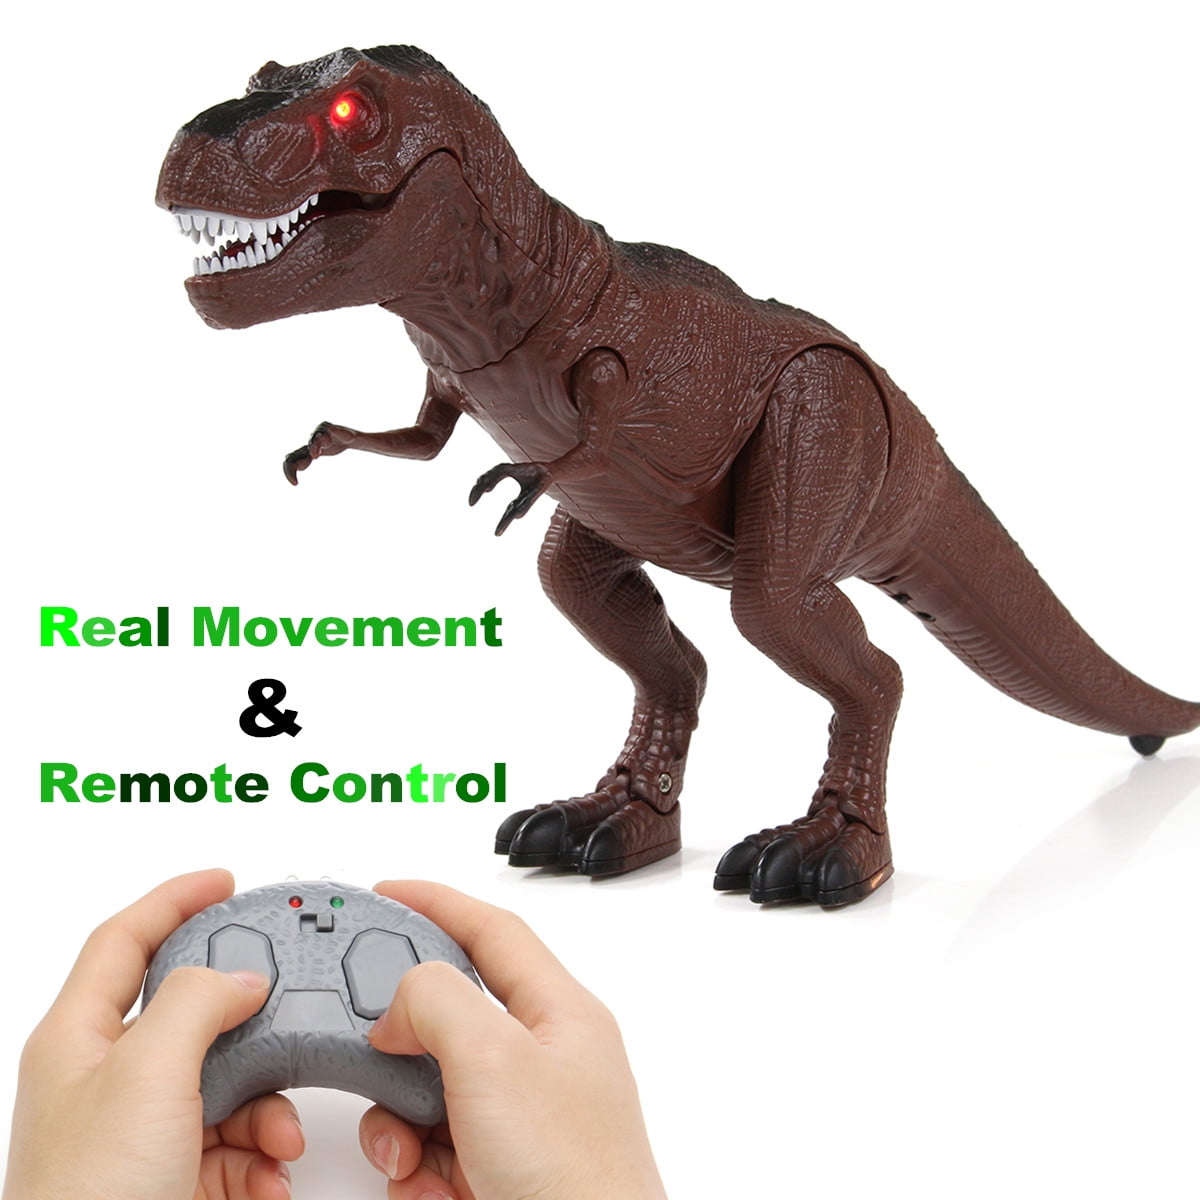 Remote Control RC T Rex Dinosaur Electronic Toy Action Figure Moving & Walking 